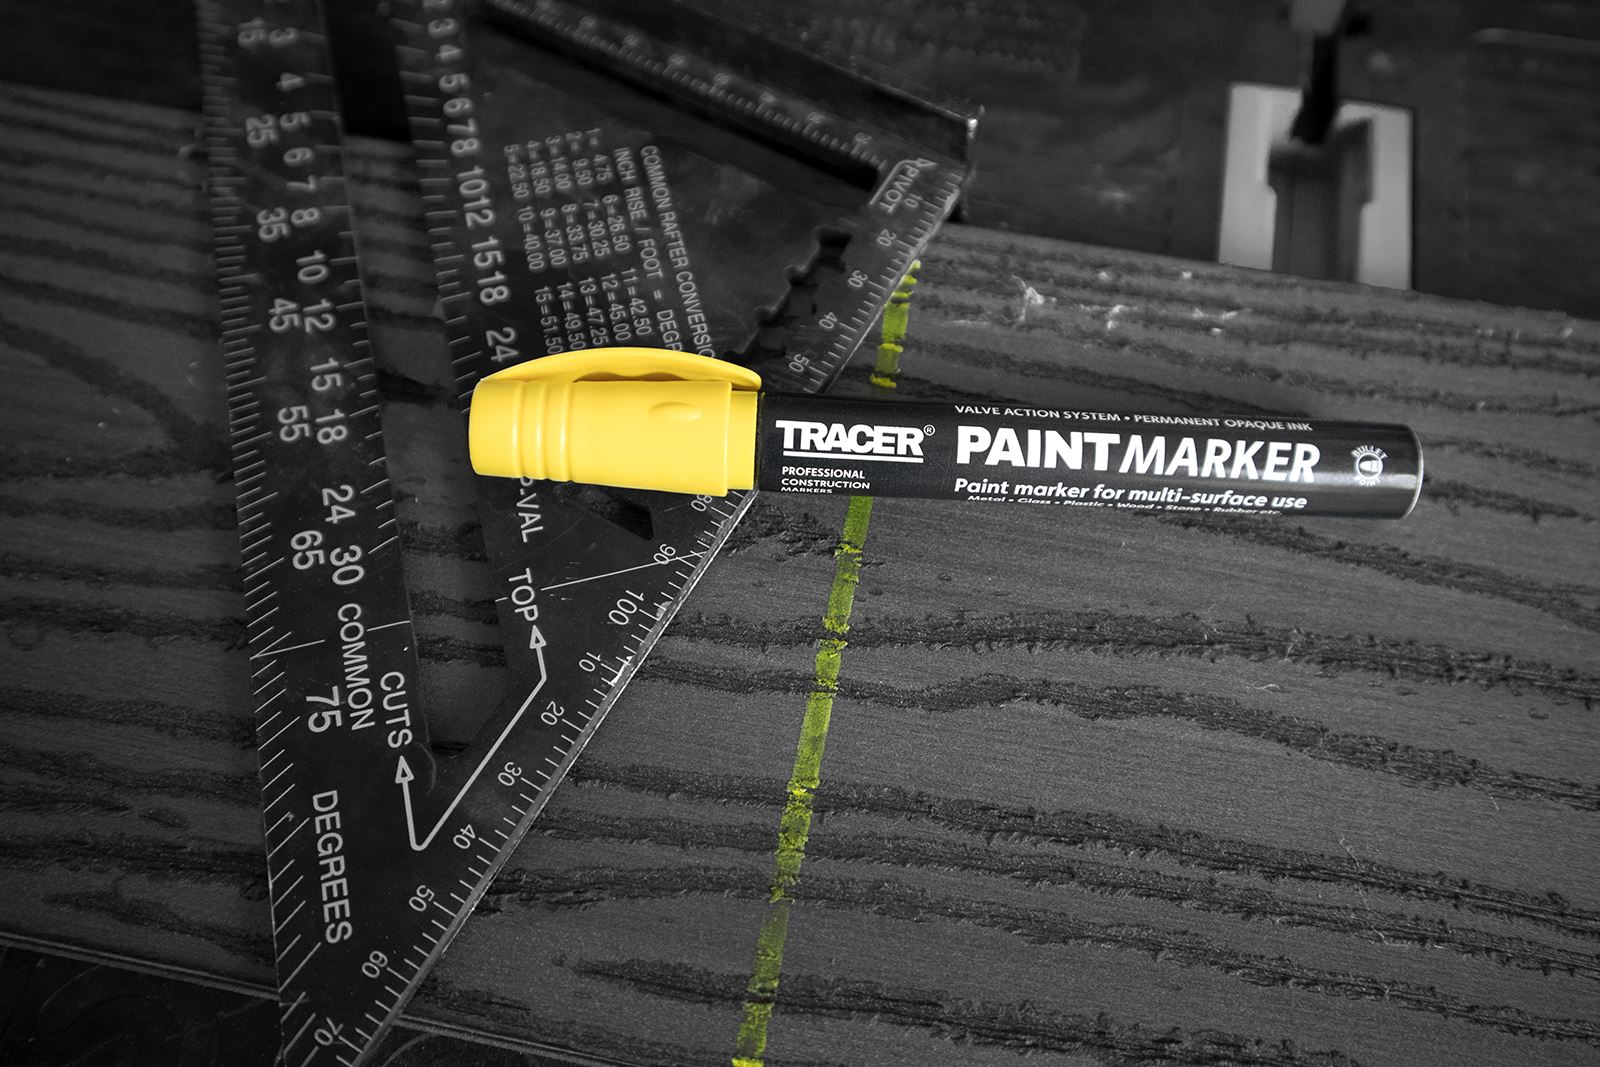 TRACER Paint Marker Yellow 1-3mm Bullet Point